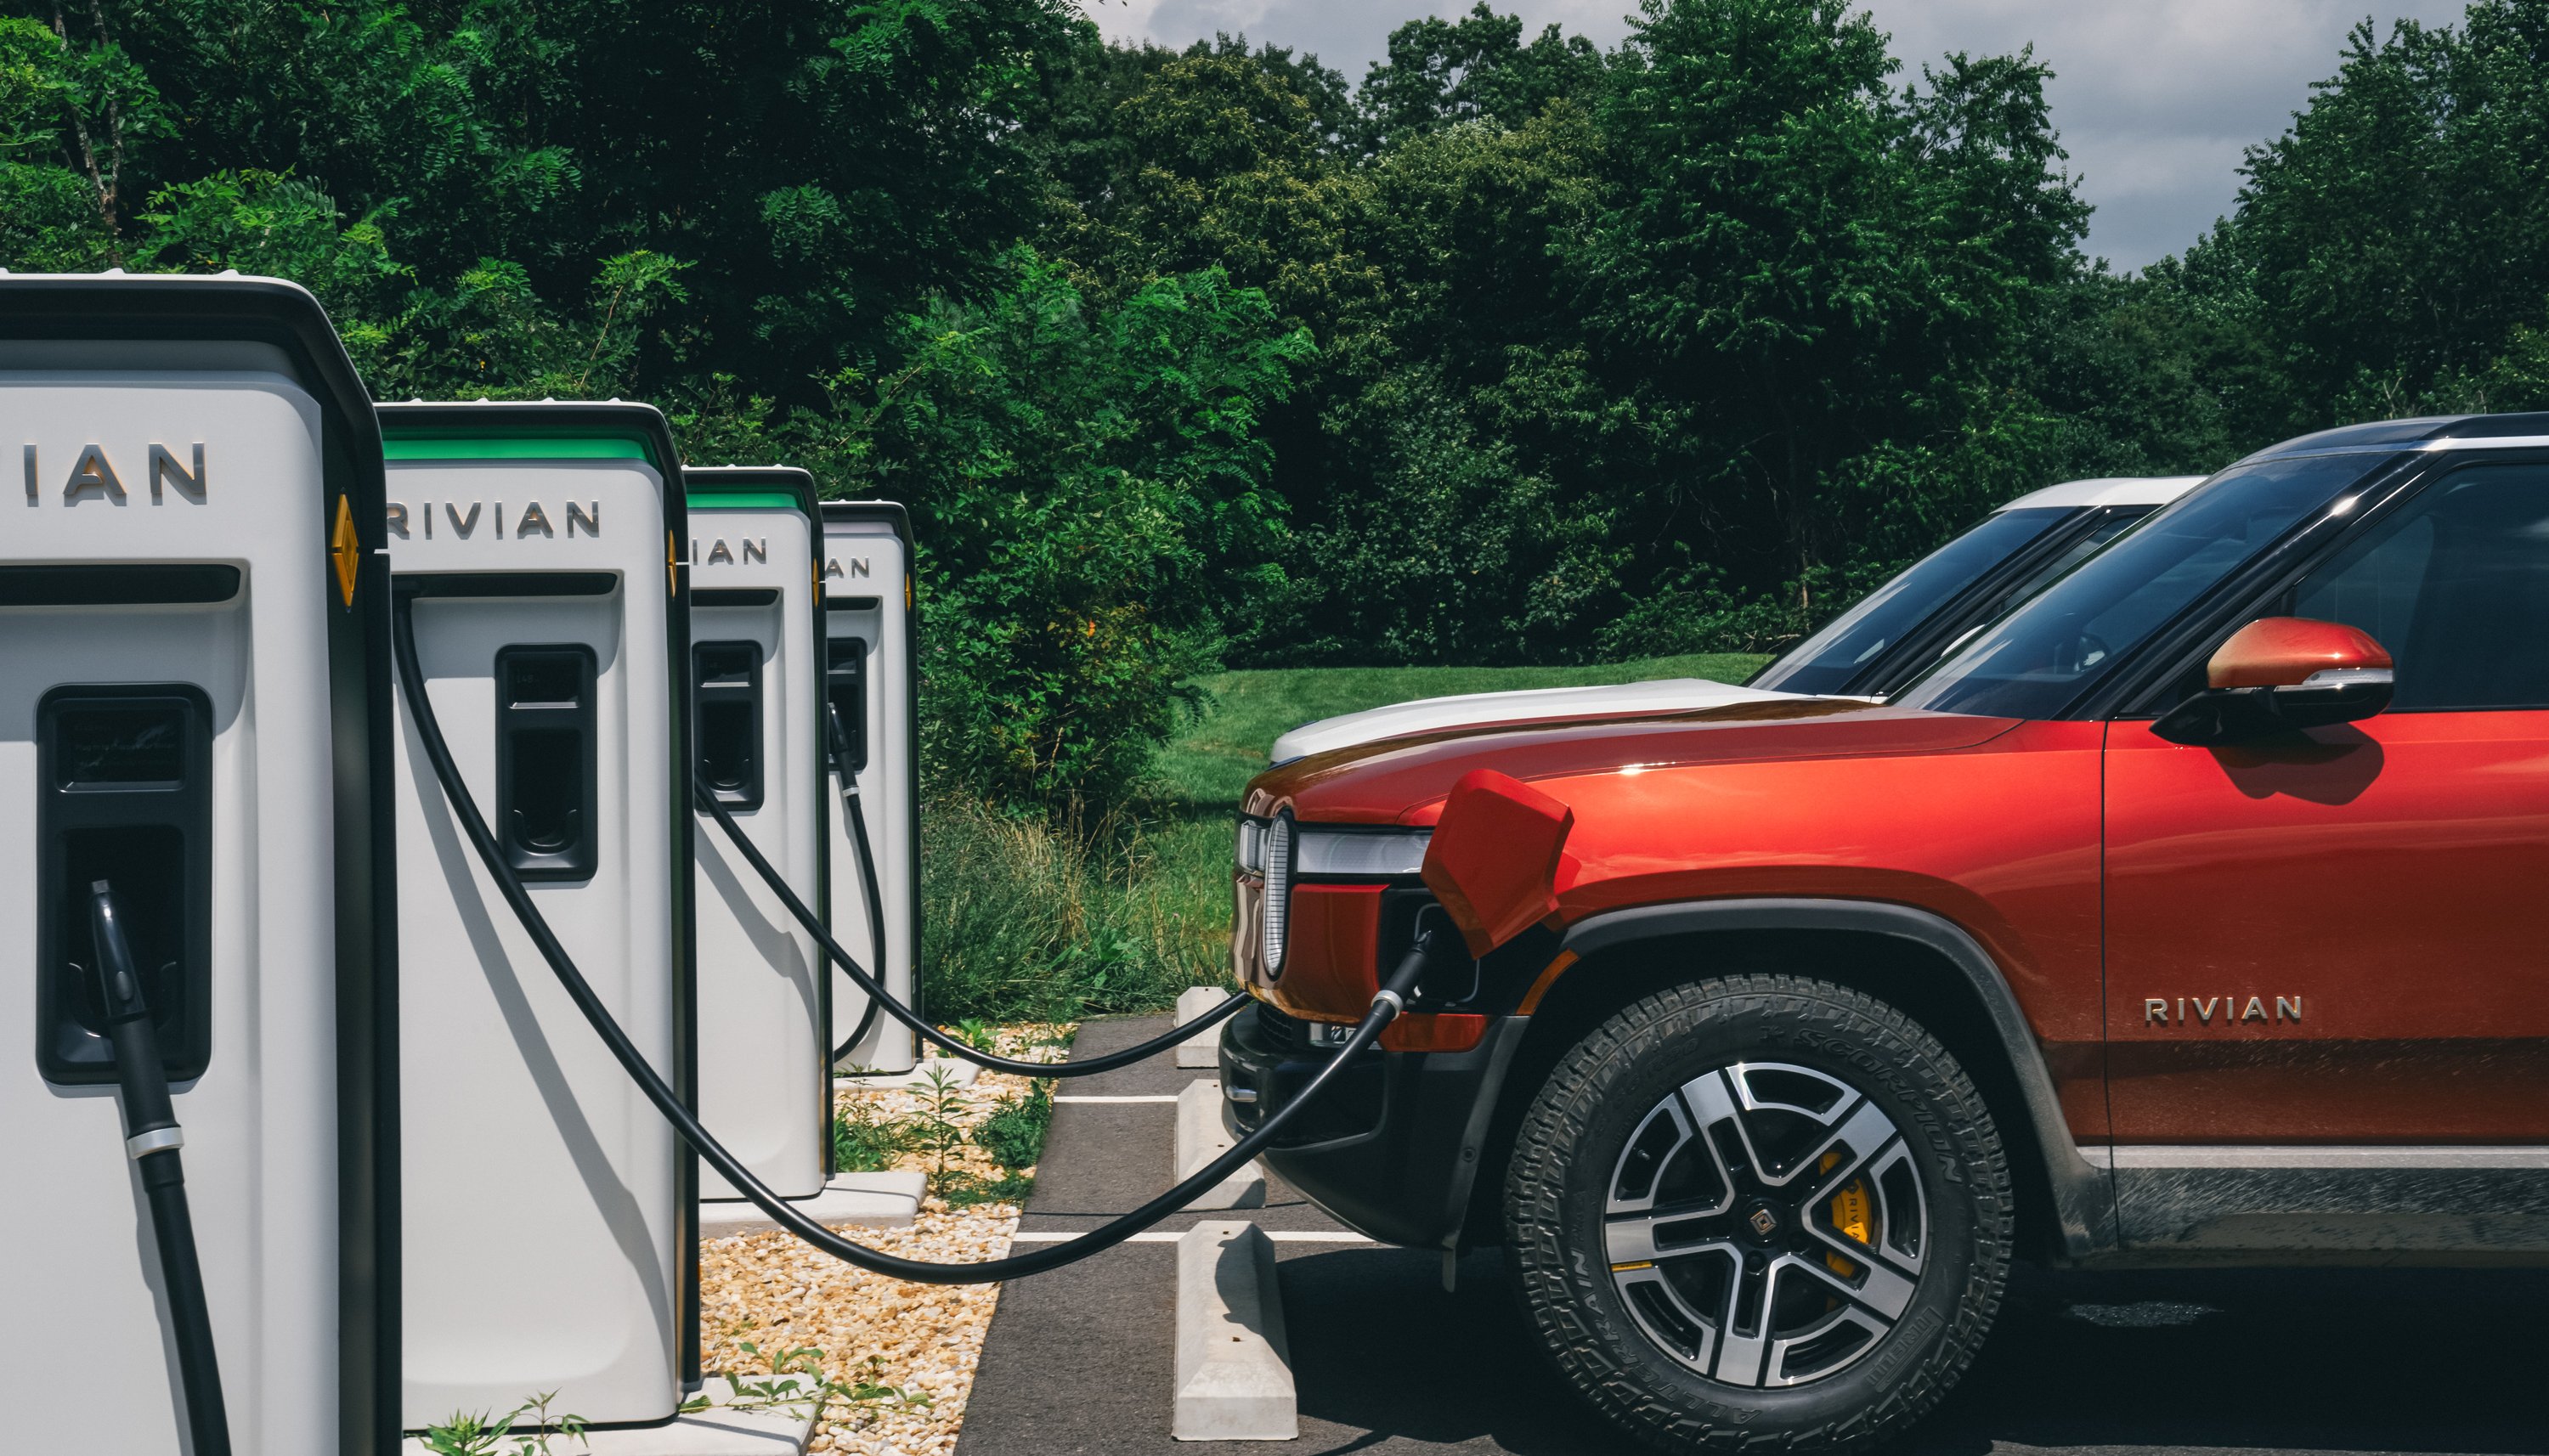 Read RIVIAN ADVENTURE NETWORK OPENS CHARGERS ALONG BLUE RIDGE PARKWAY by Rivian